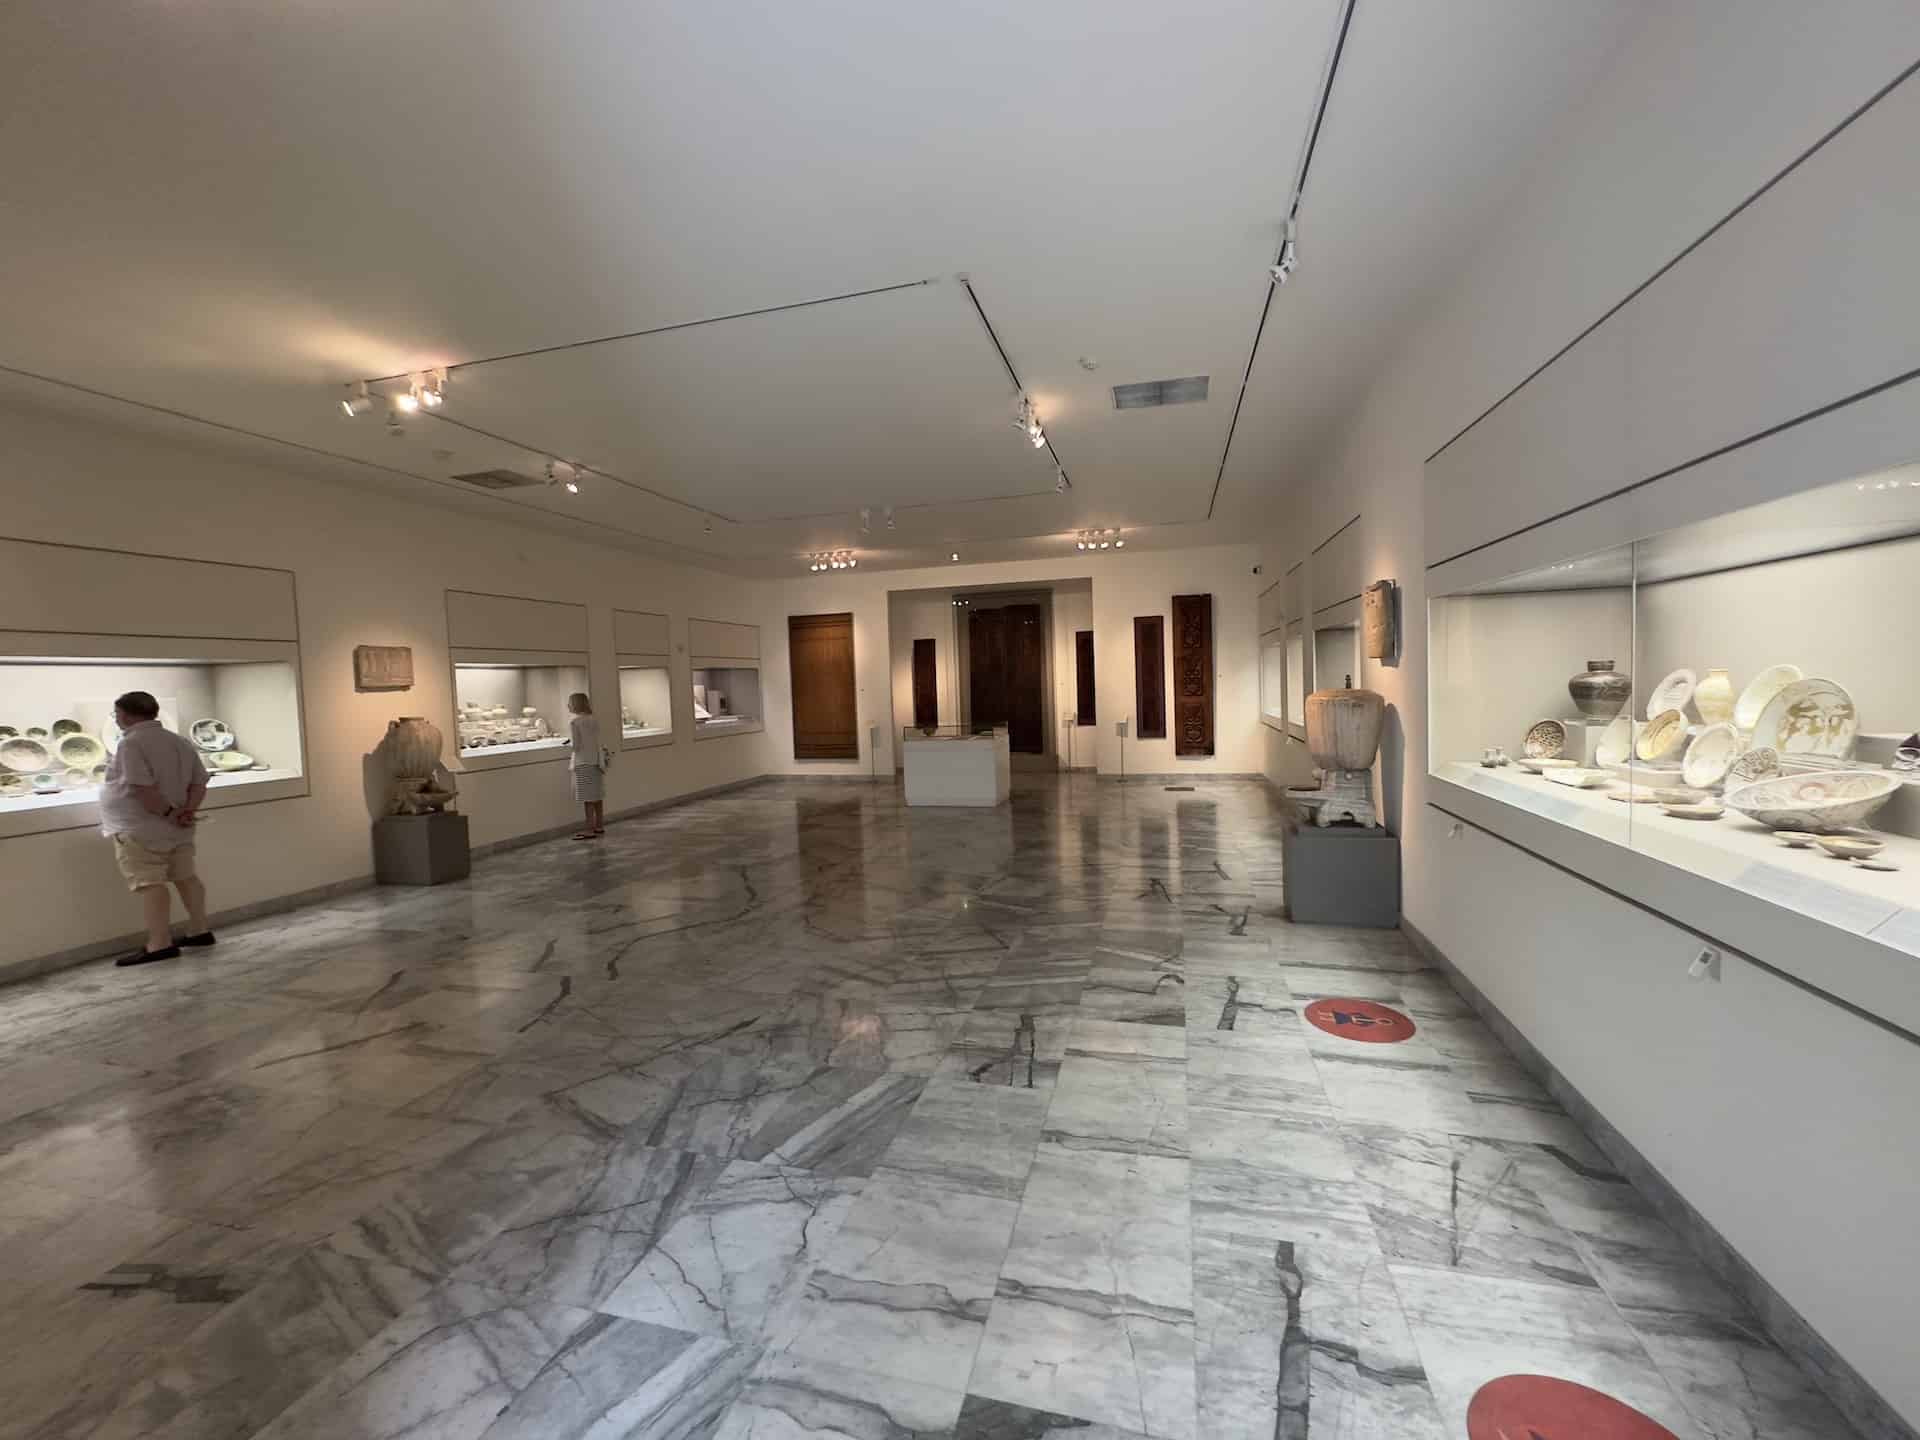 Gallery I at the Benaki Museum of Islamic Art in Athens, Greece